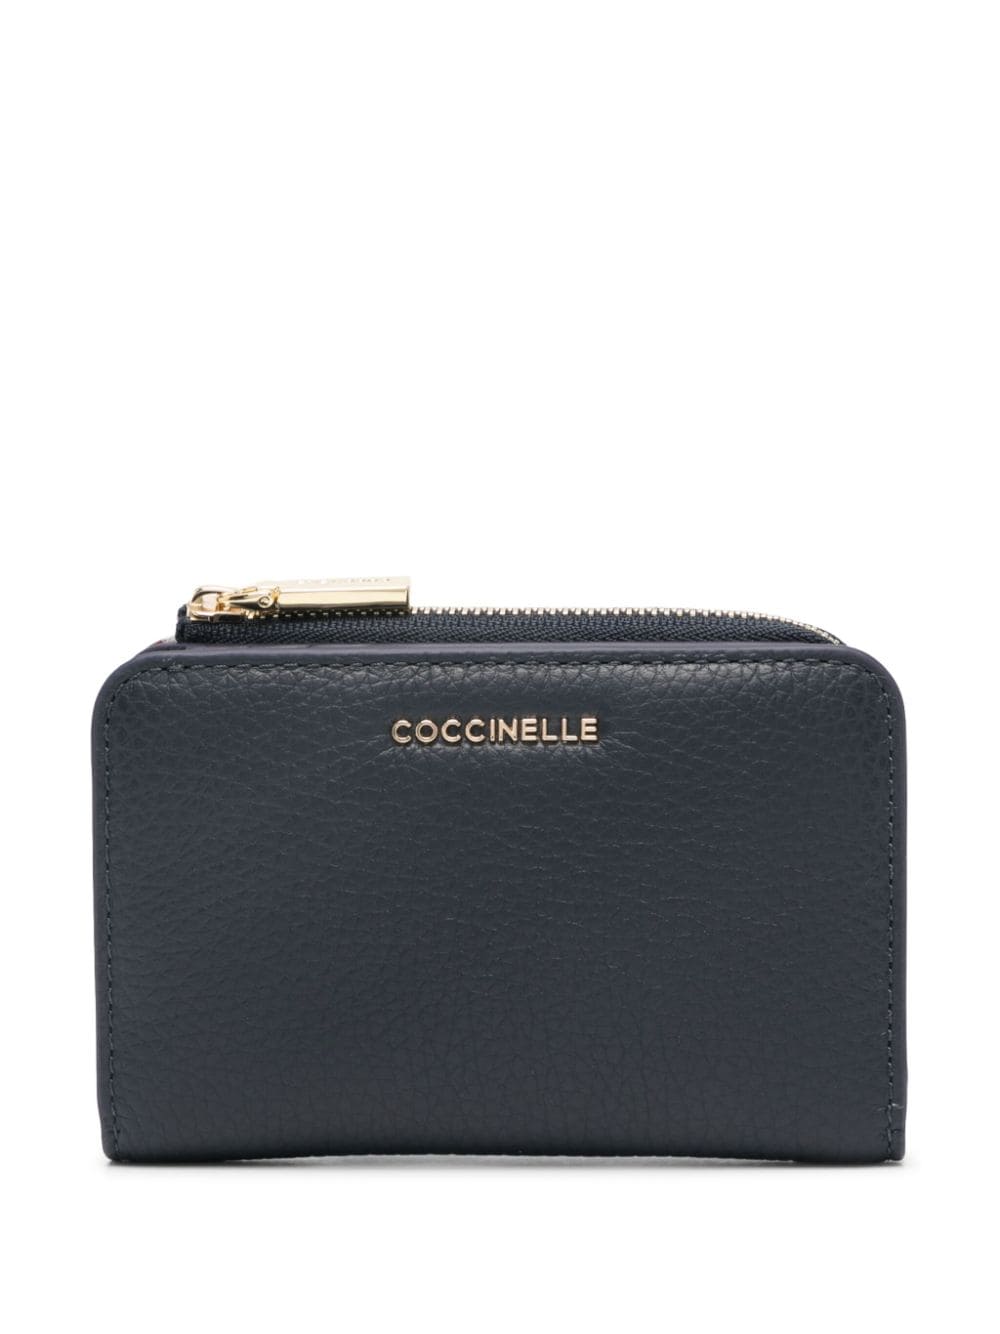 Coccinelle Small Metallic Soft Leather Wallet In Blue